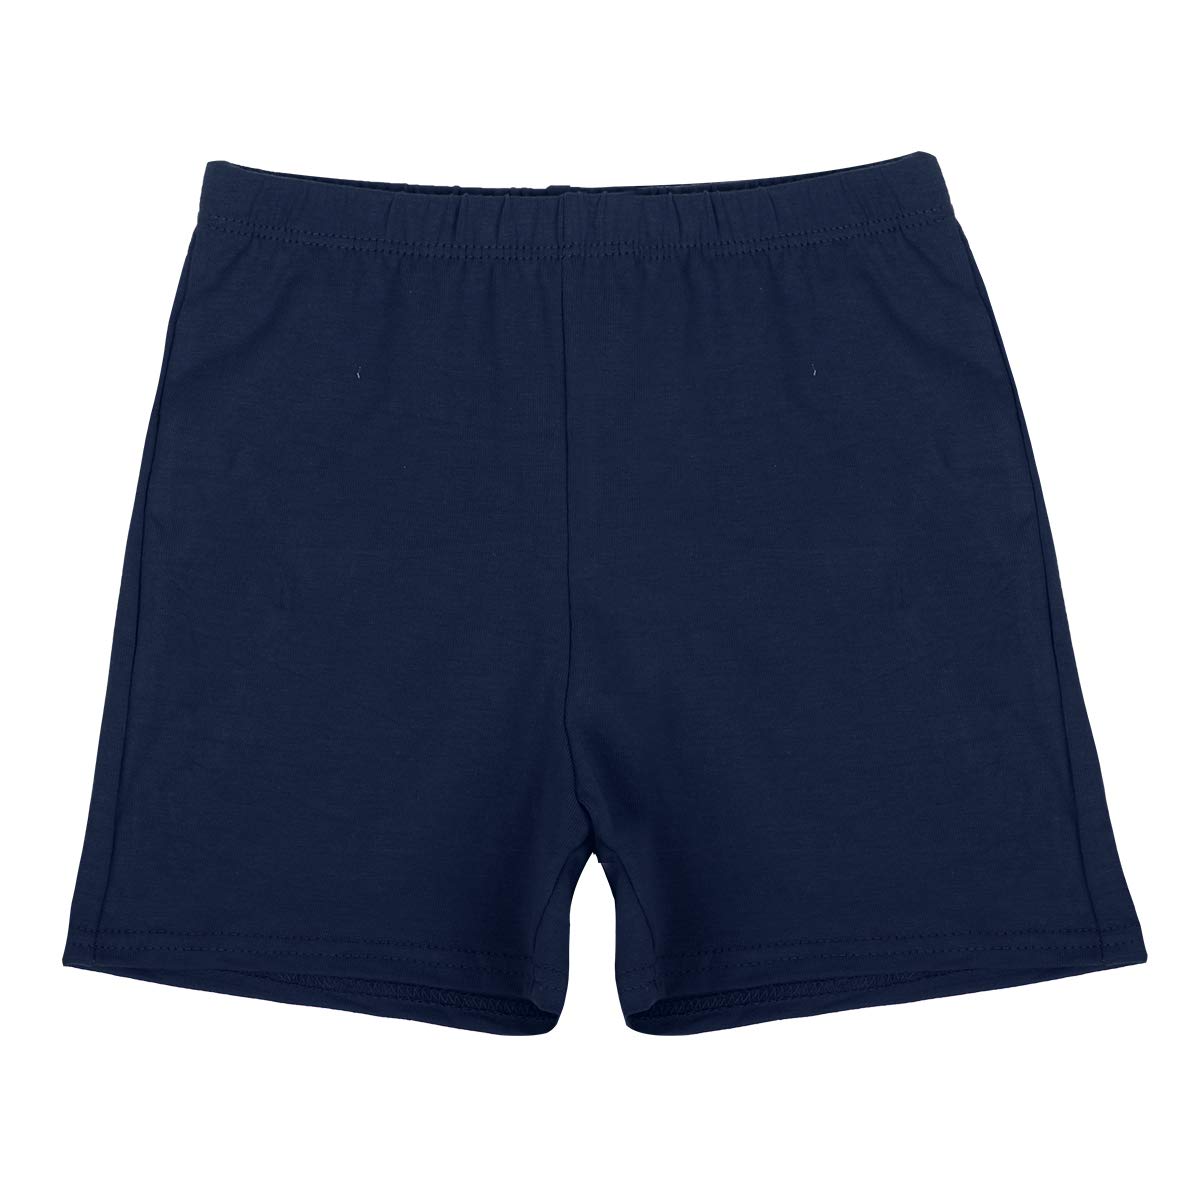 Girls' Navy PE Shorts, 2-pack, Stretch Jersey, Elasticated Waist, 6-7 Y